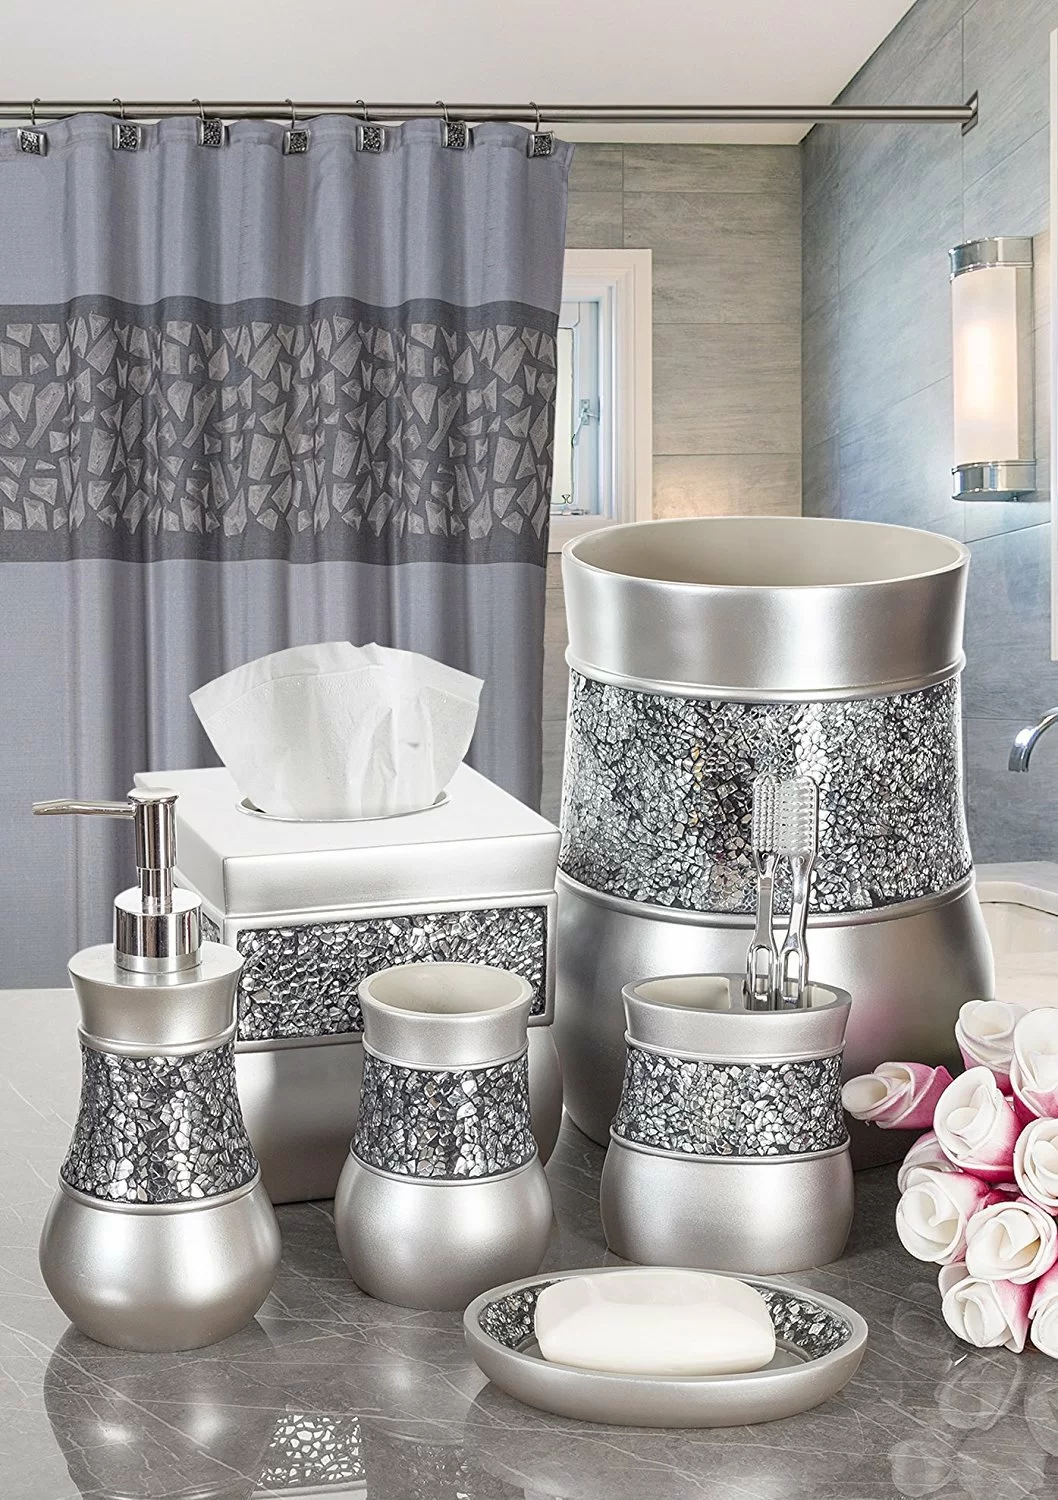 “Elevate Your Bathroom: Essential Accessories for a Stylish and Functional Space”